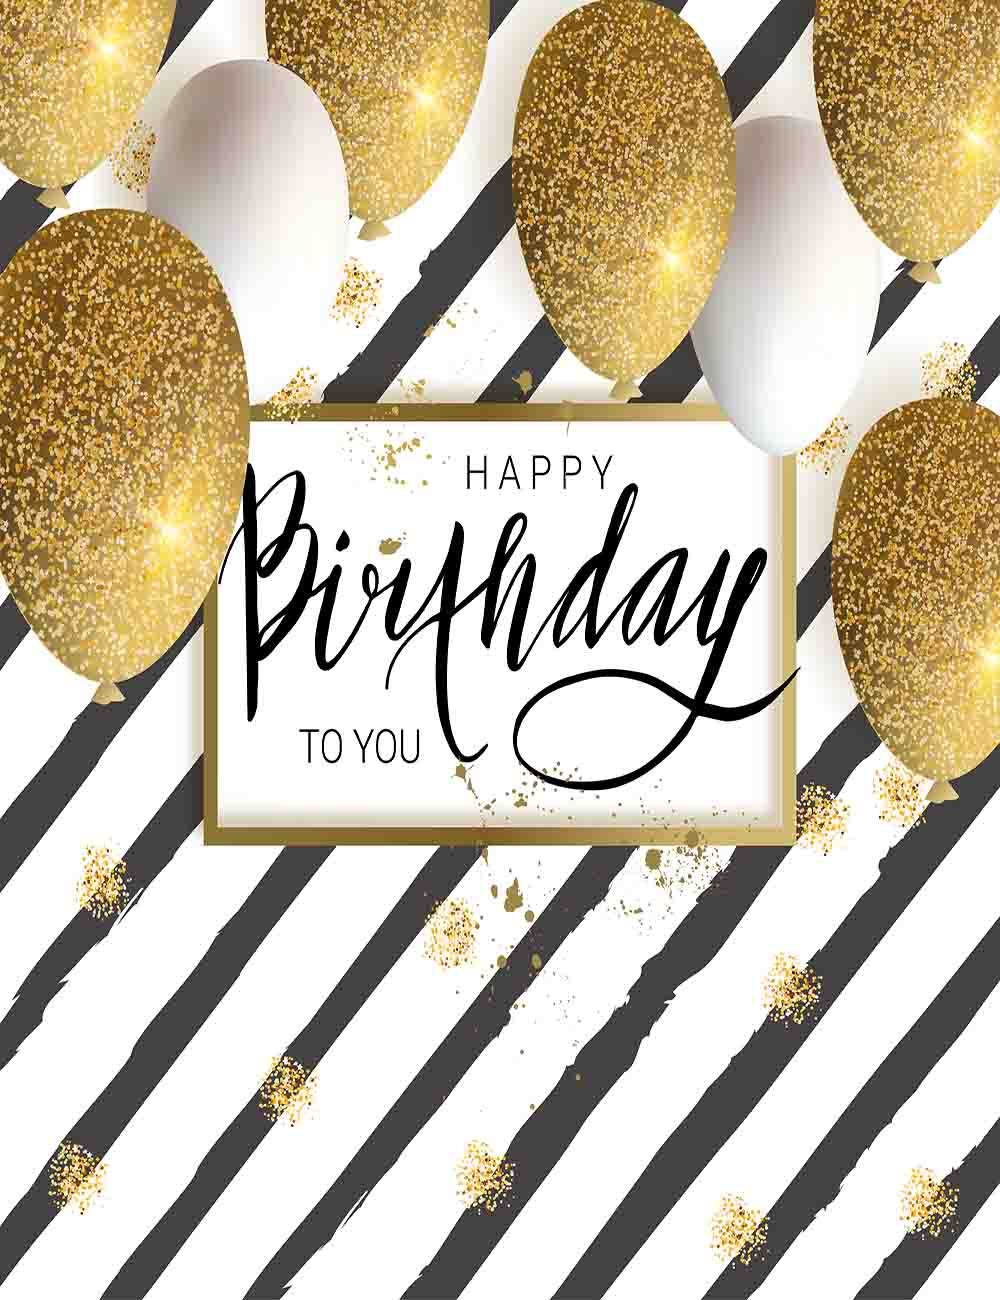 Black Stripes With Golden Balloons For Birthday Photography Backdrop Shopbackdrop